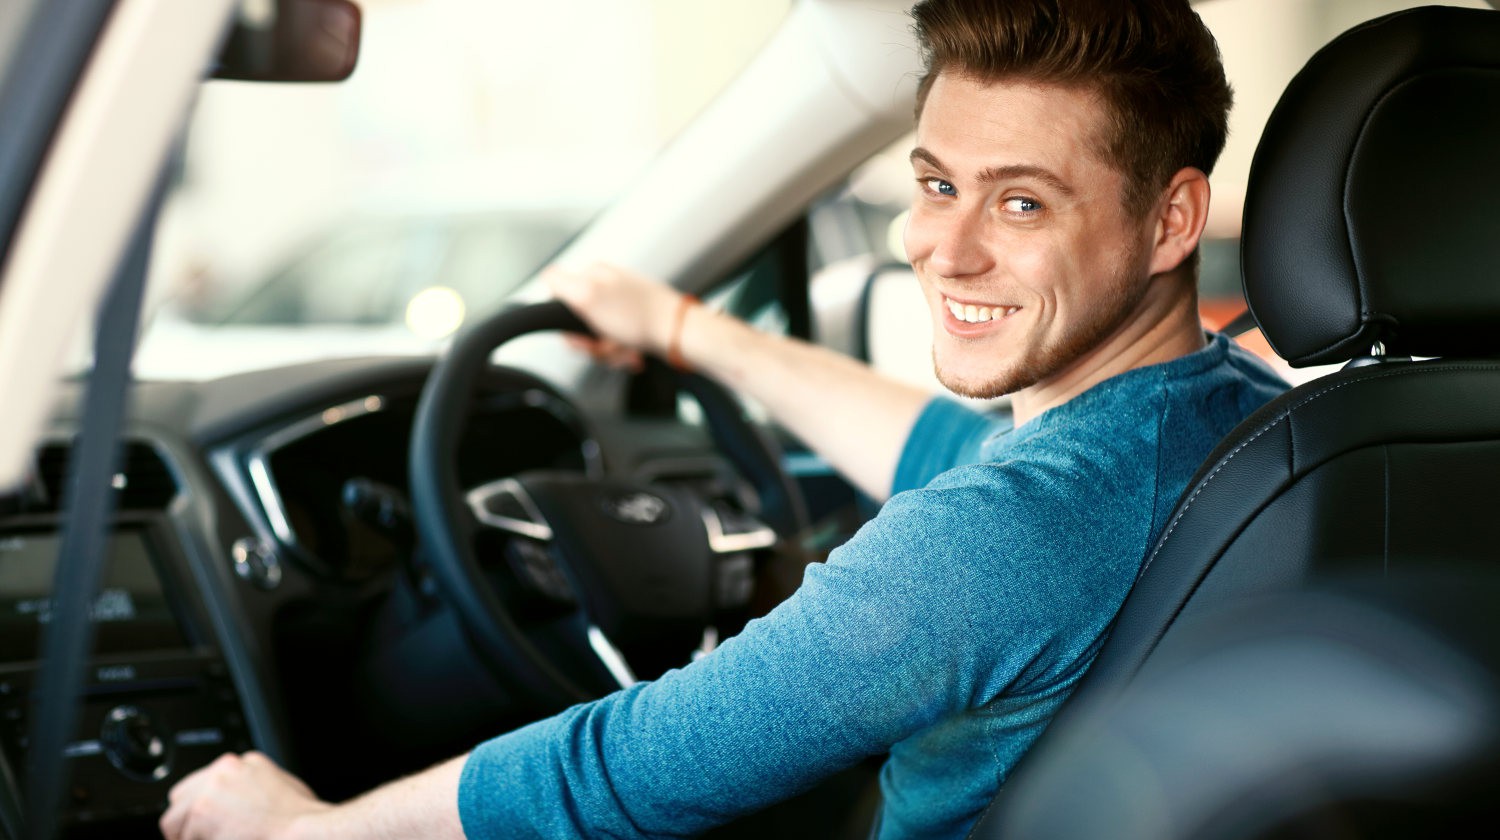 Featured | Happy young male driver behind the wheel | Road Trip Food: Eating While Traveling on Keto Diet